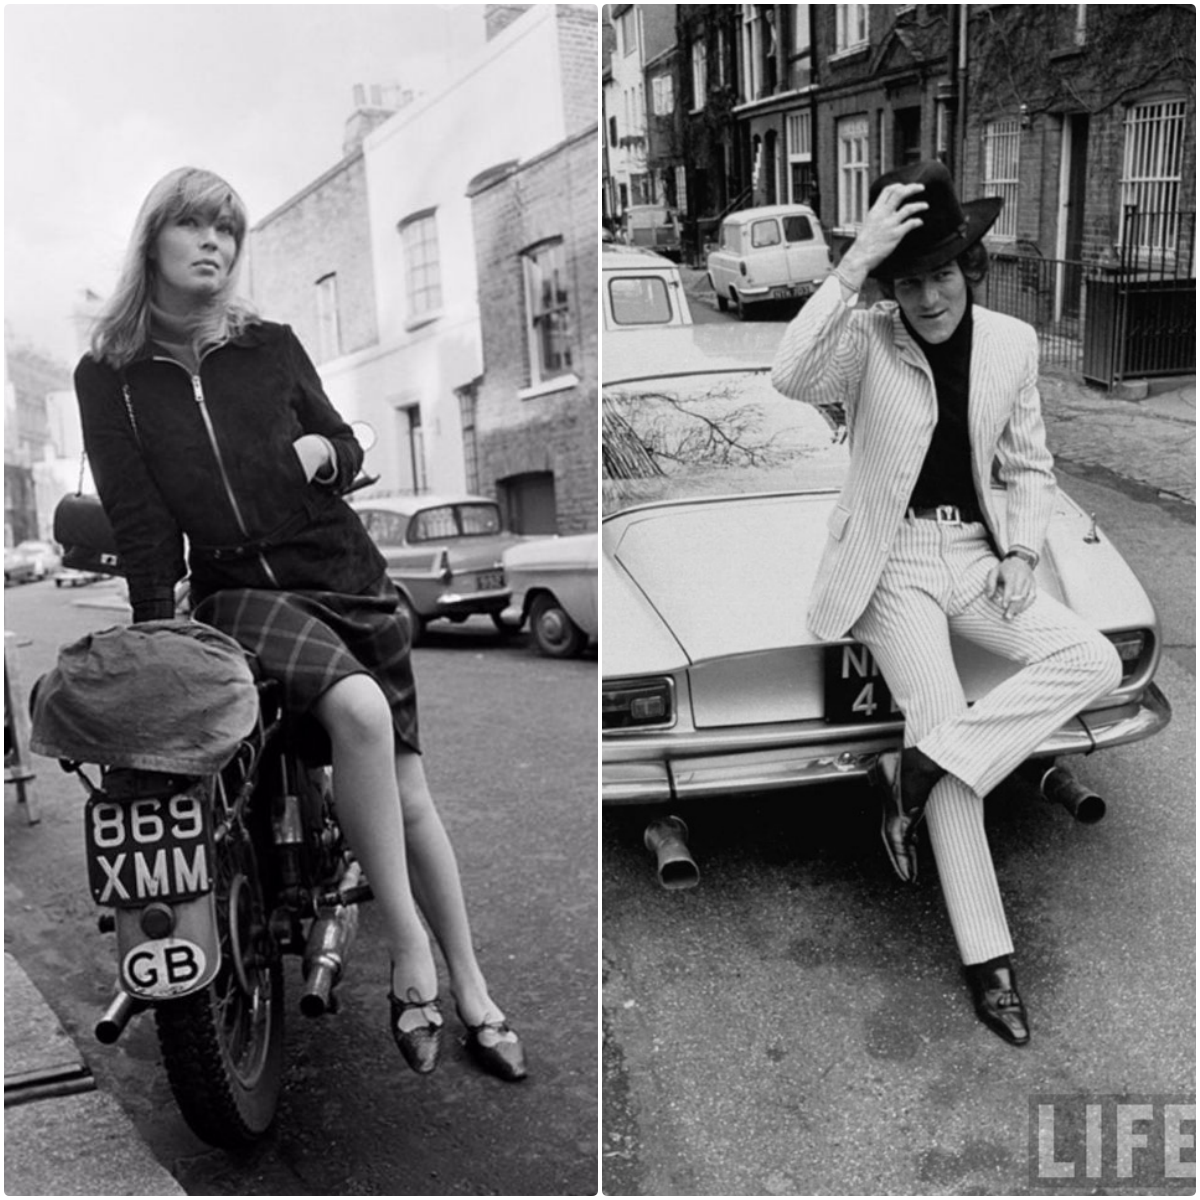 The Swinging London – Black and White Photos Show What Young Londoners Wore in the 1960s